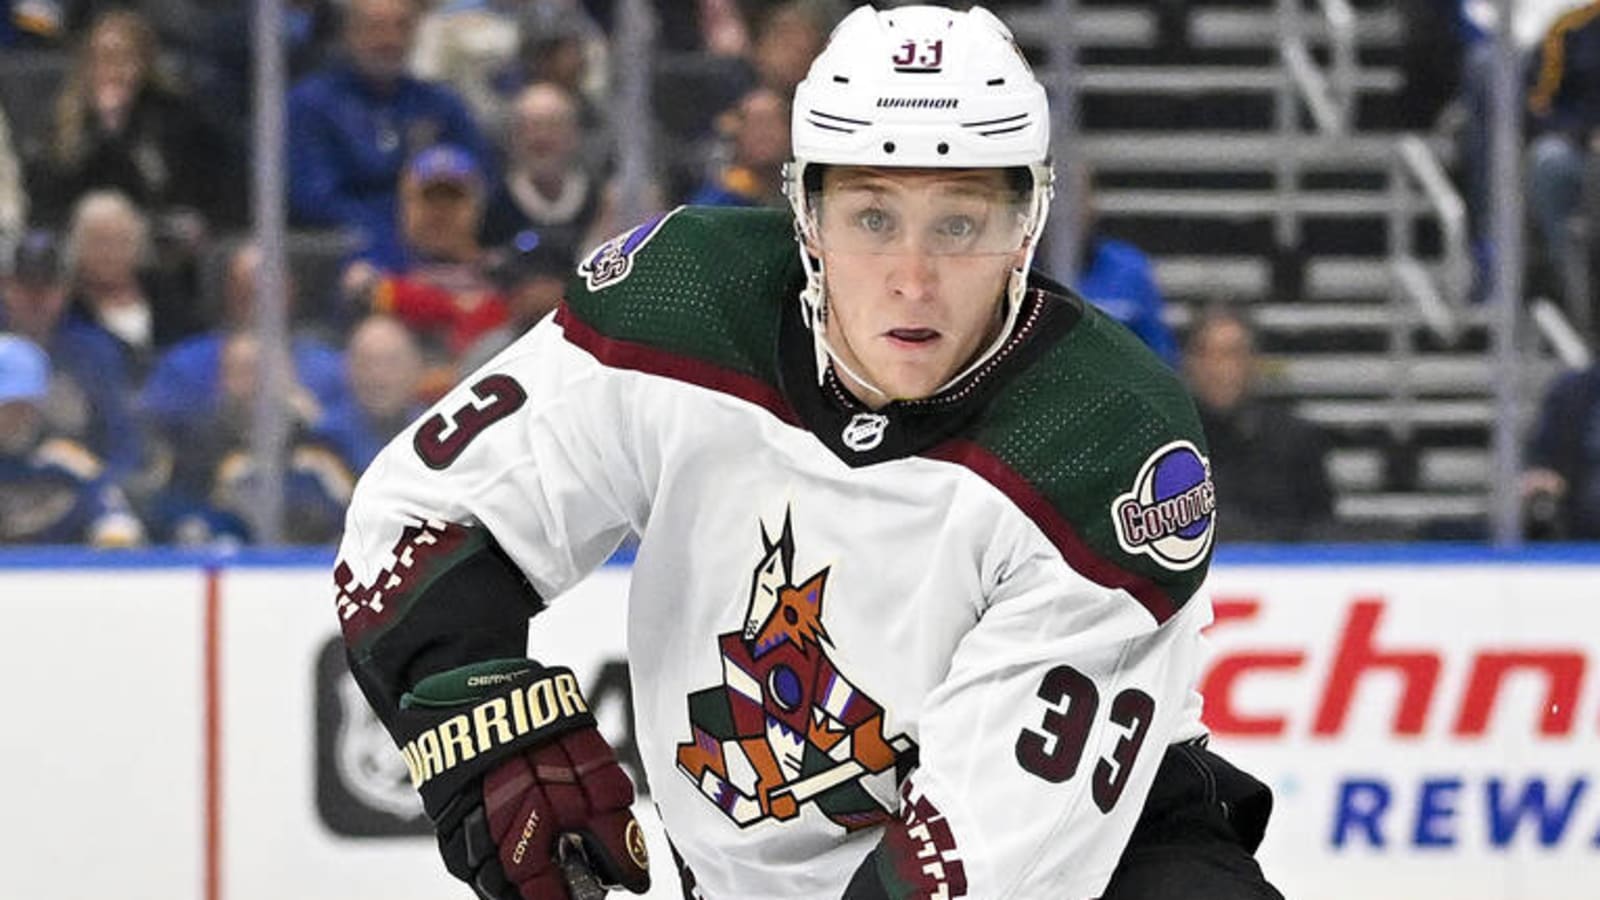 Coyotes defenseman out for season due to injury